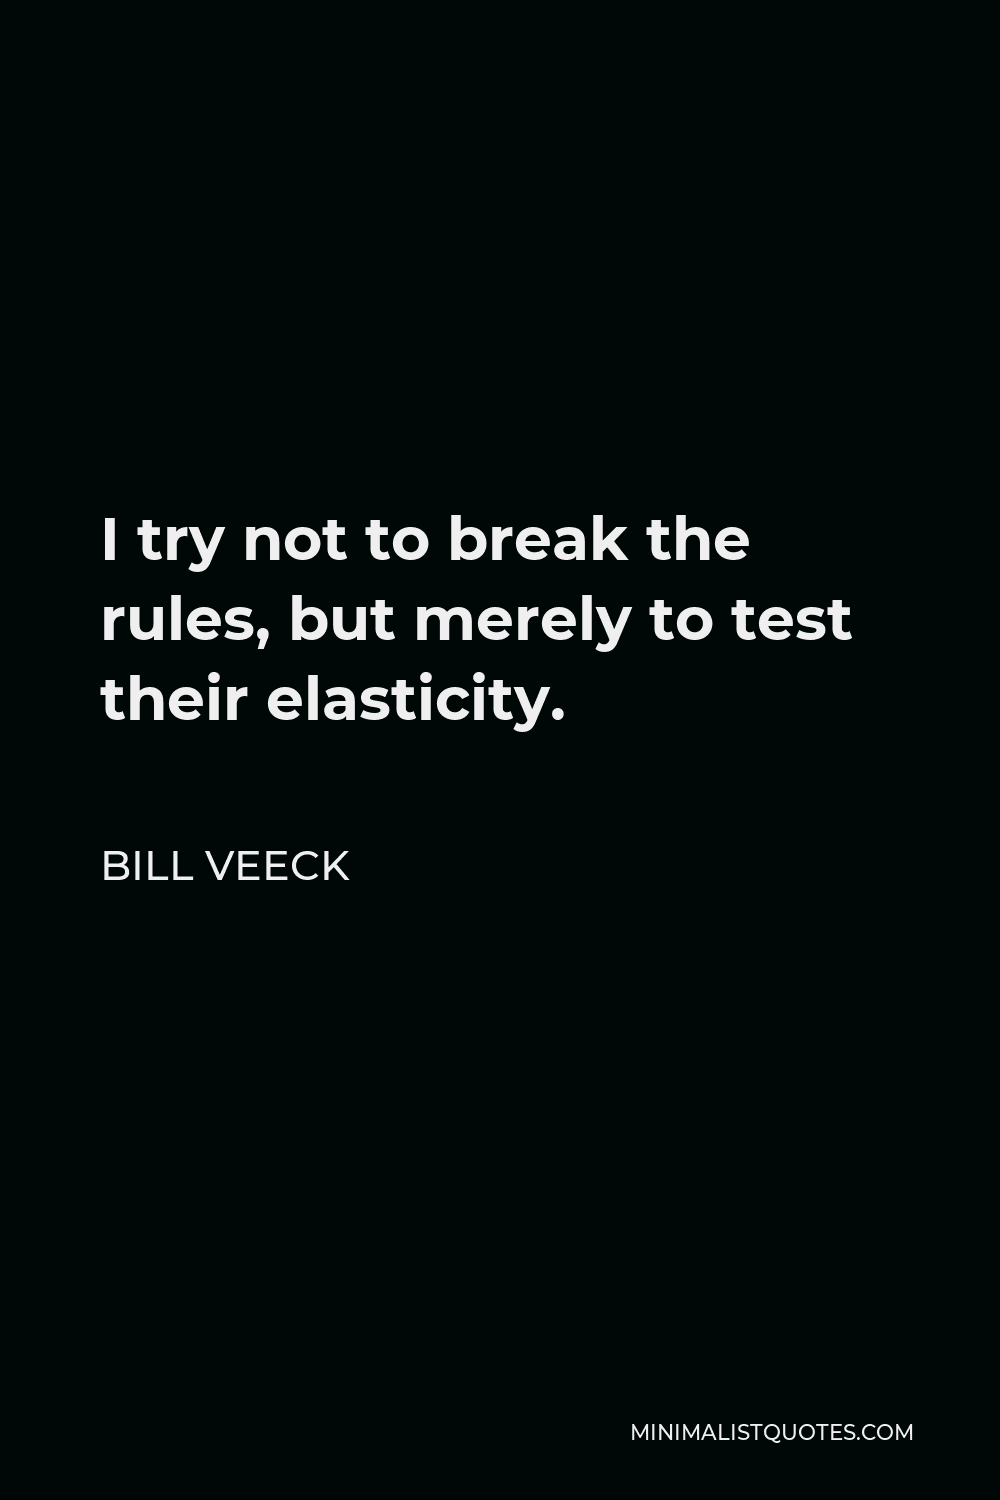 Bill Veeck Quote - I try not to break the rules, but merely to test their elasticity.